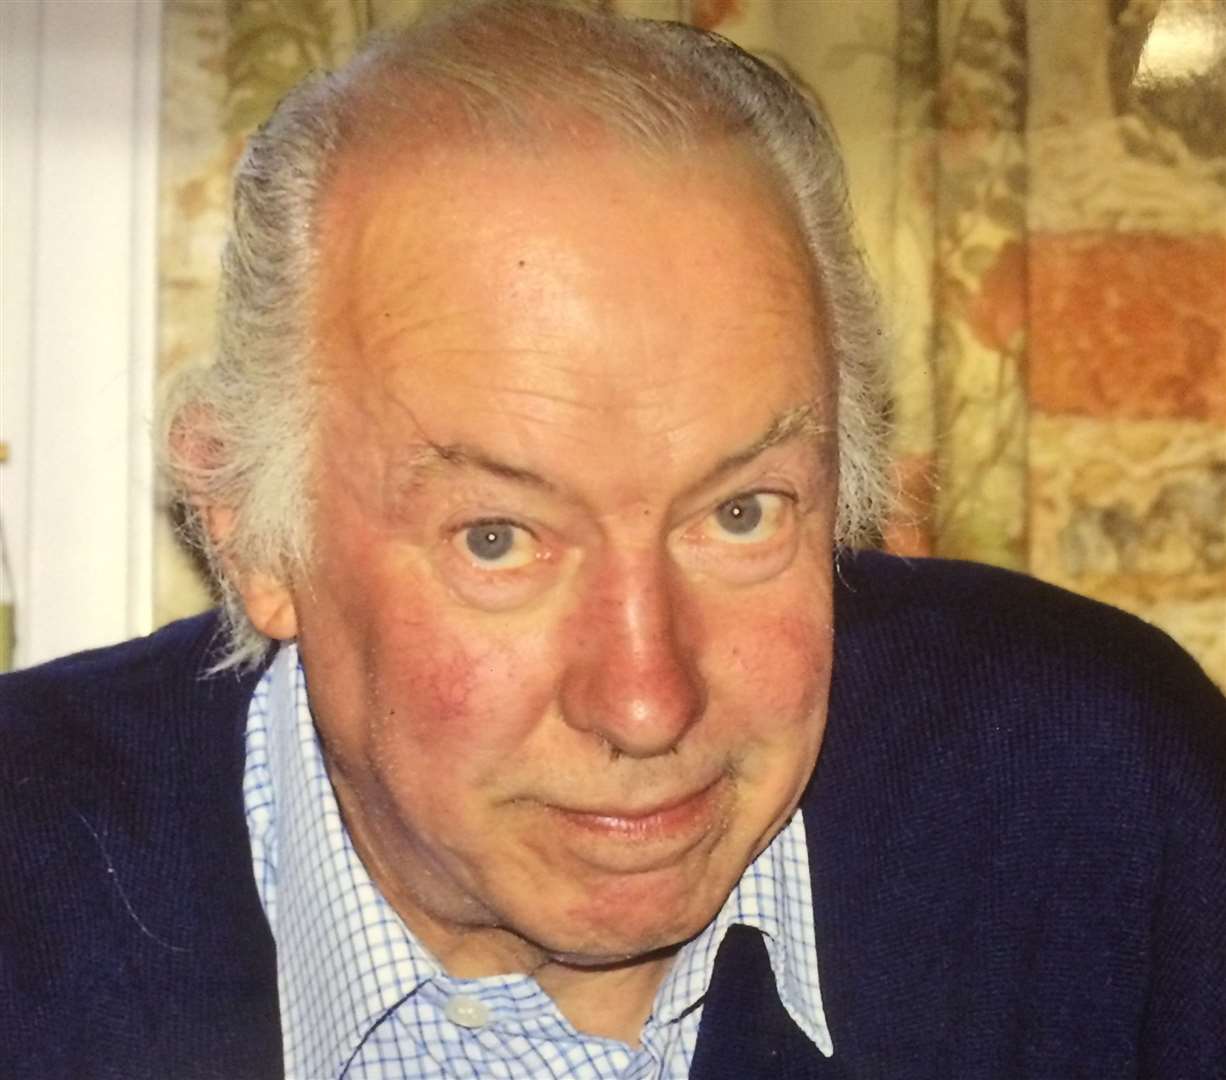 Roy Blackman was killed at his home in Biddenden